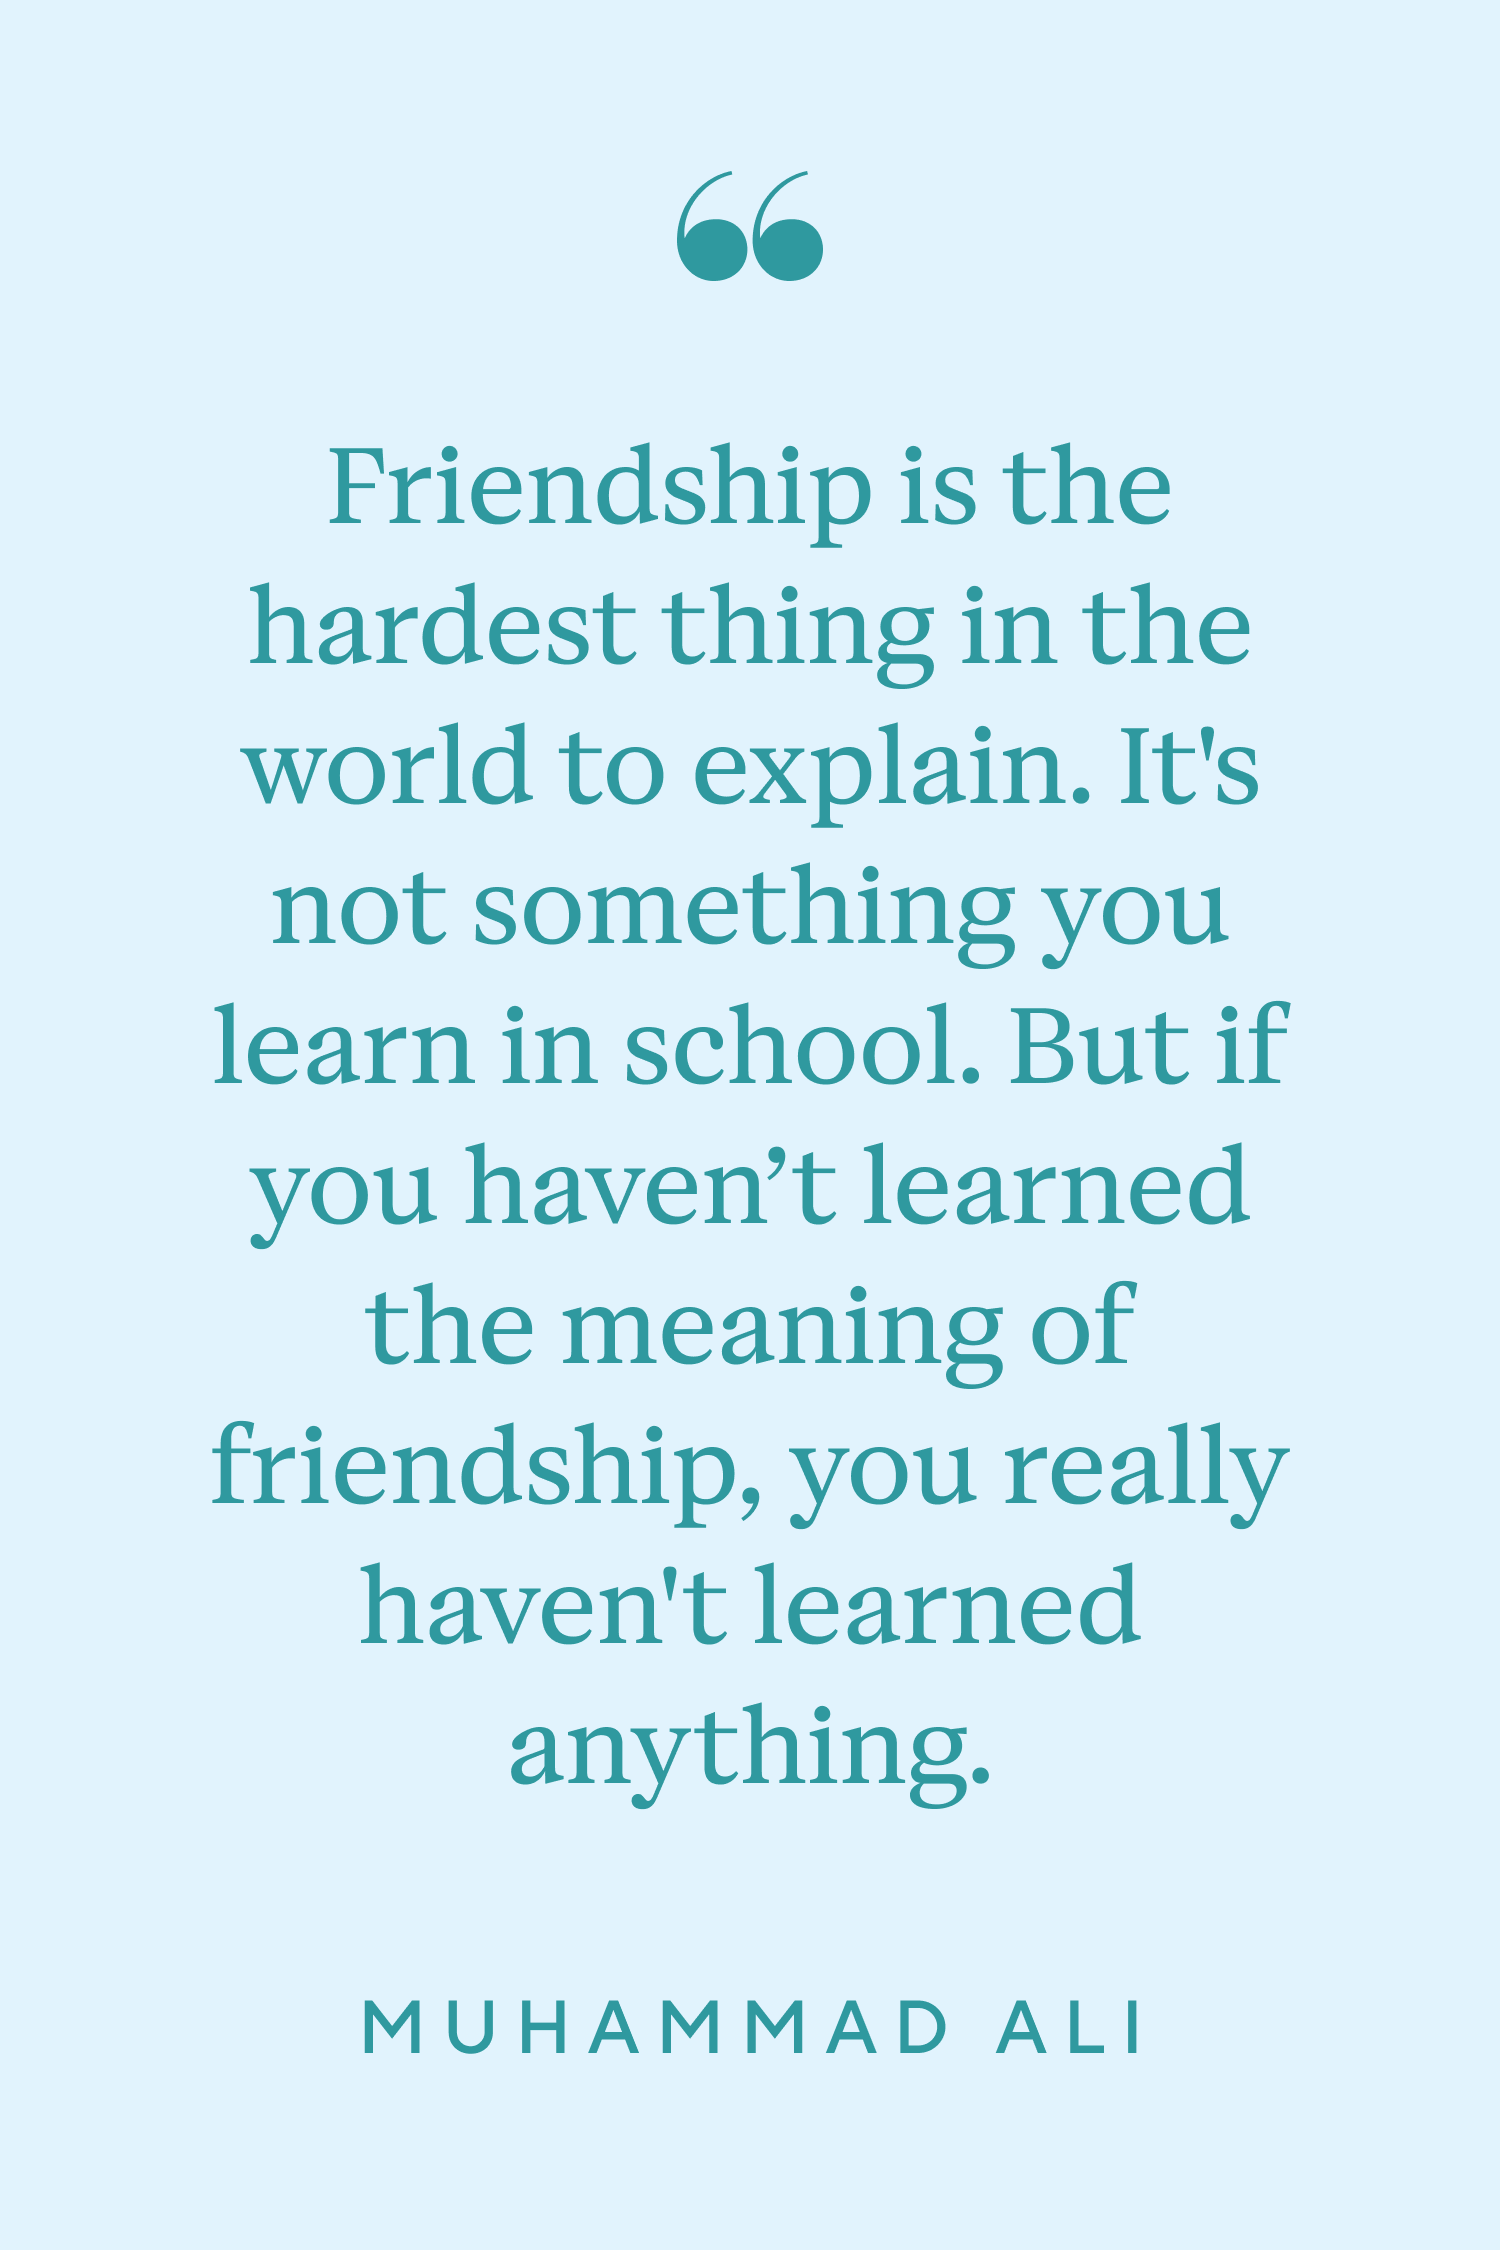 what i learned about friendship is